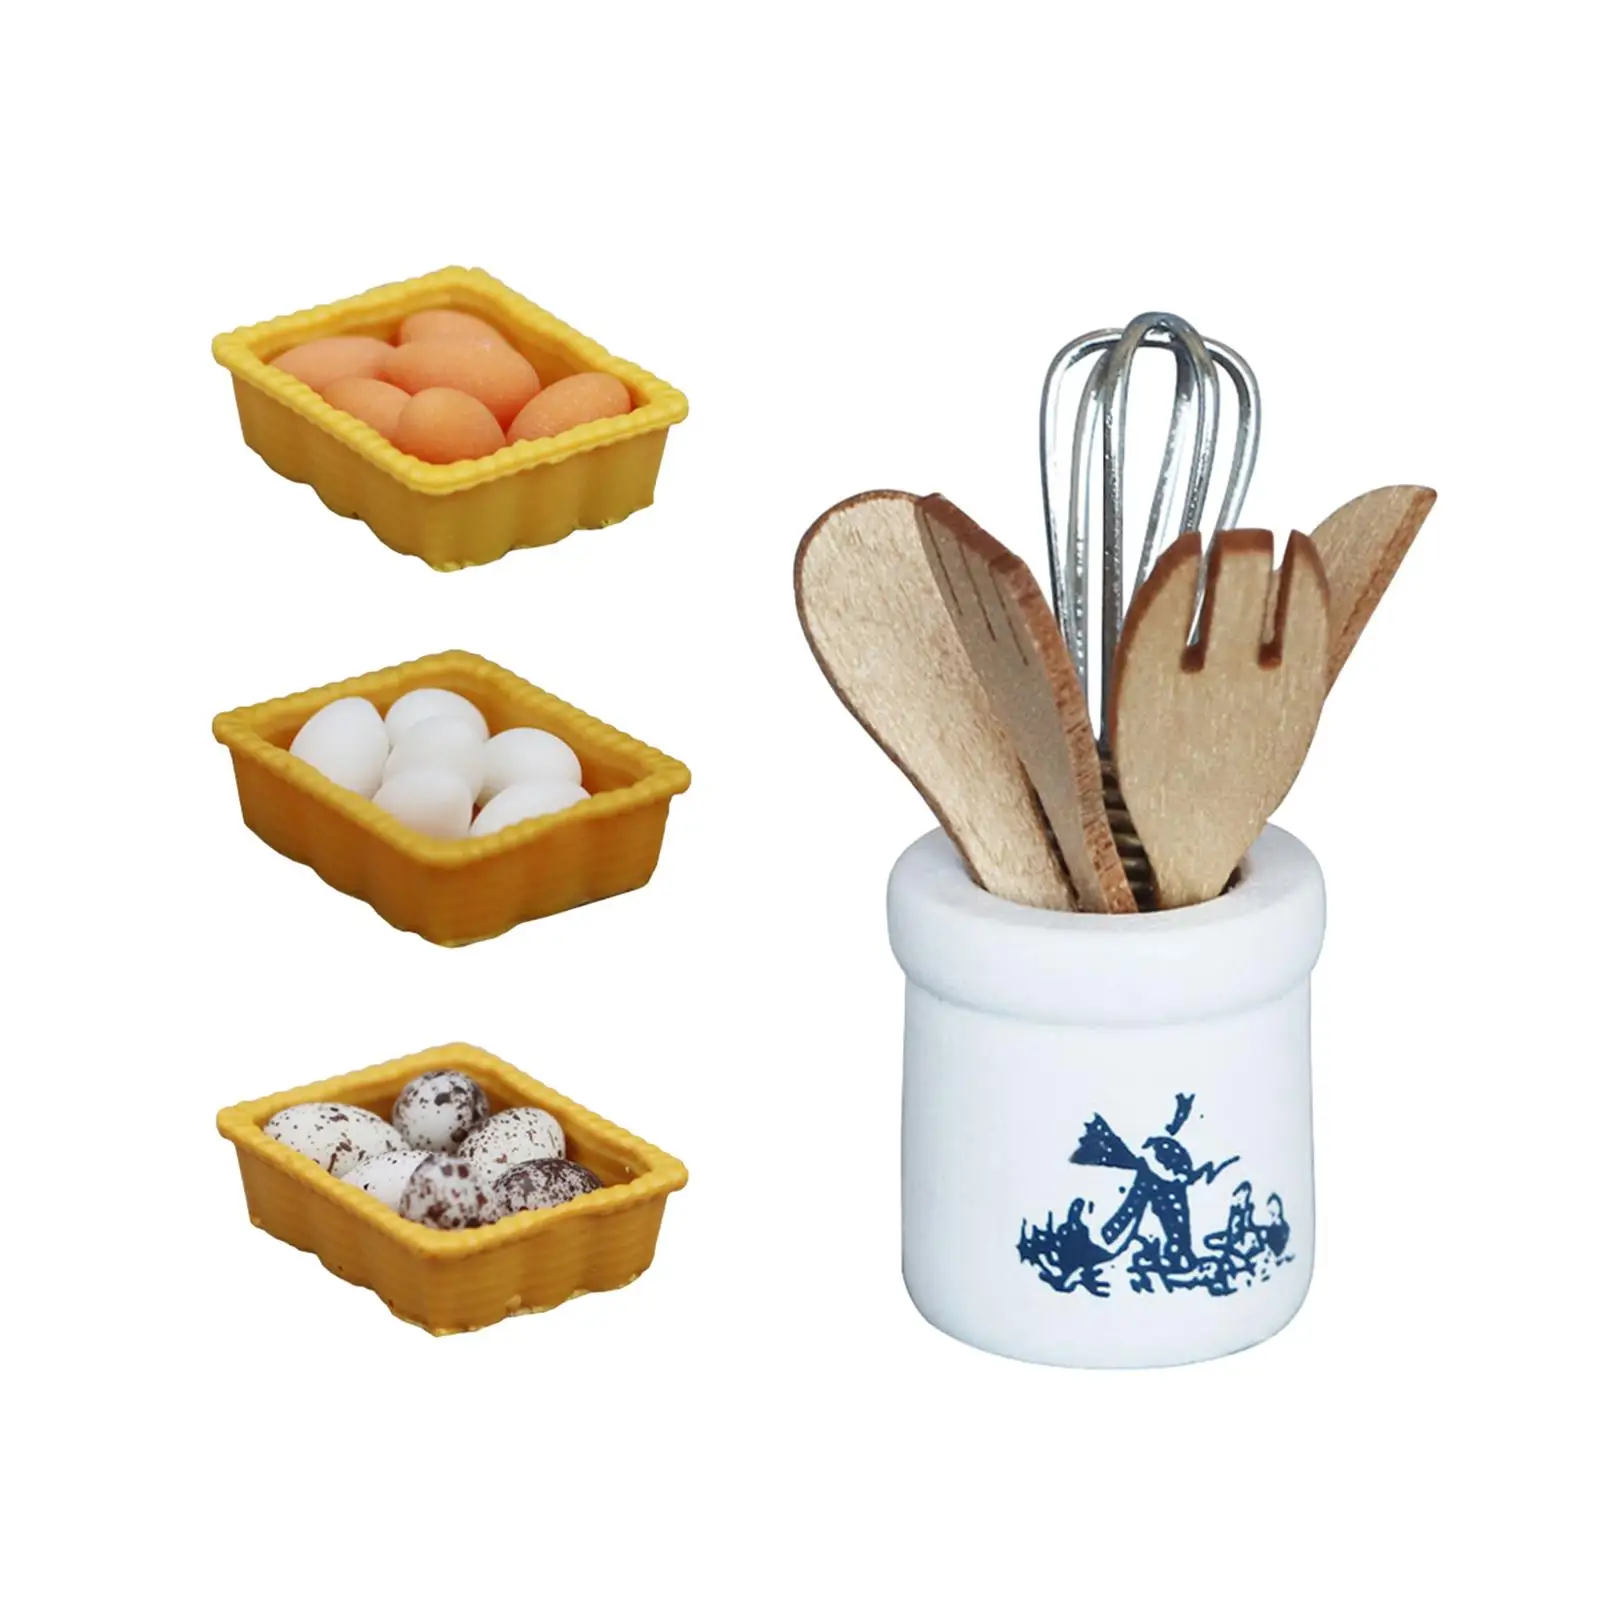 Dollhouse Kitchen Utensils Dollhouse Decor with Egg and Egg Basket 1:12 Miniature Baking Tools